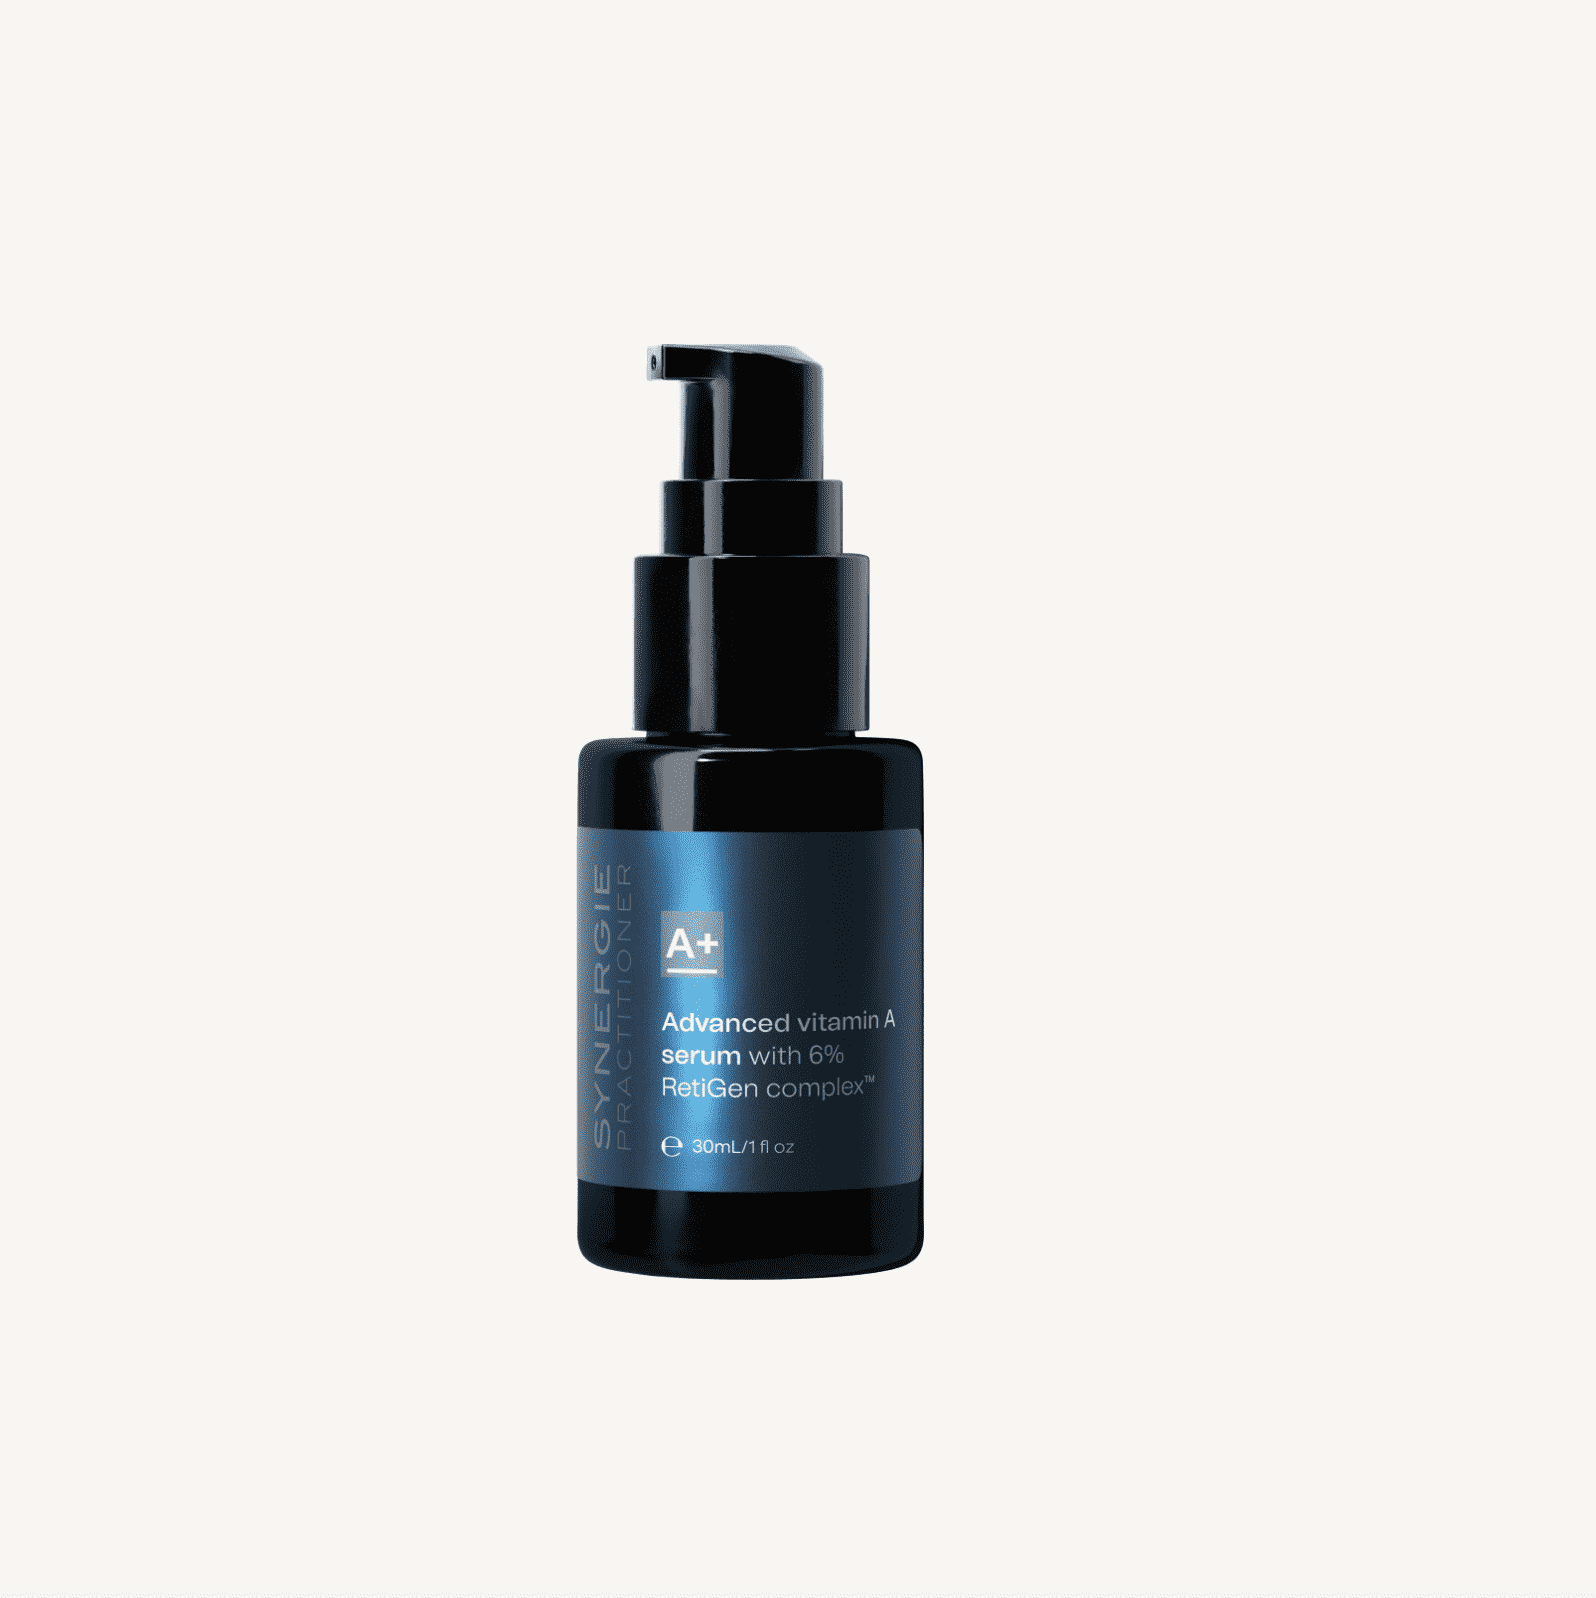 A bottle of skinceuticals advanced vitamin a serum with a black and blue label and a pump dispenser, isolated on a white background.